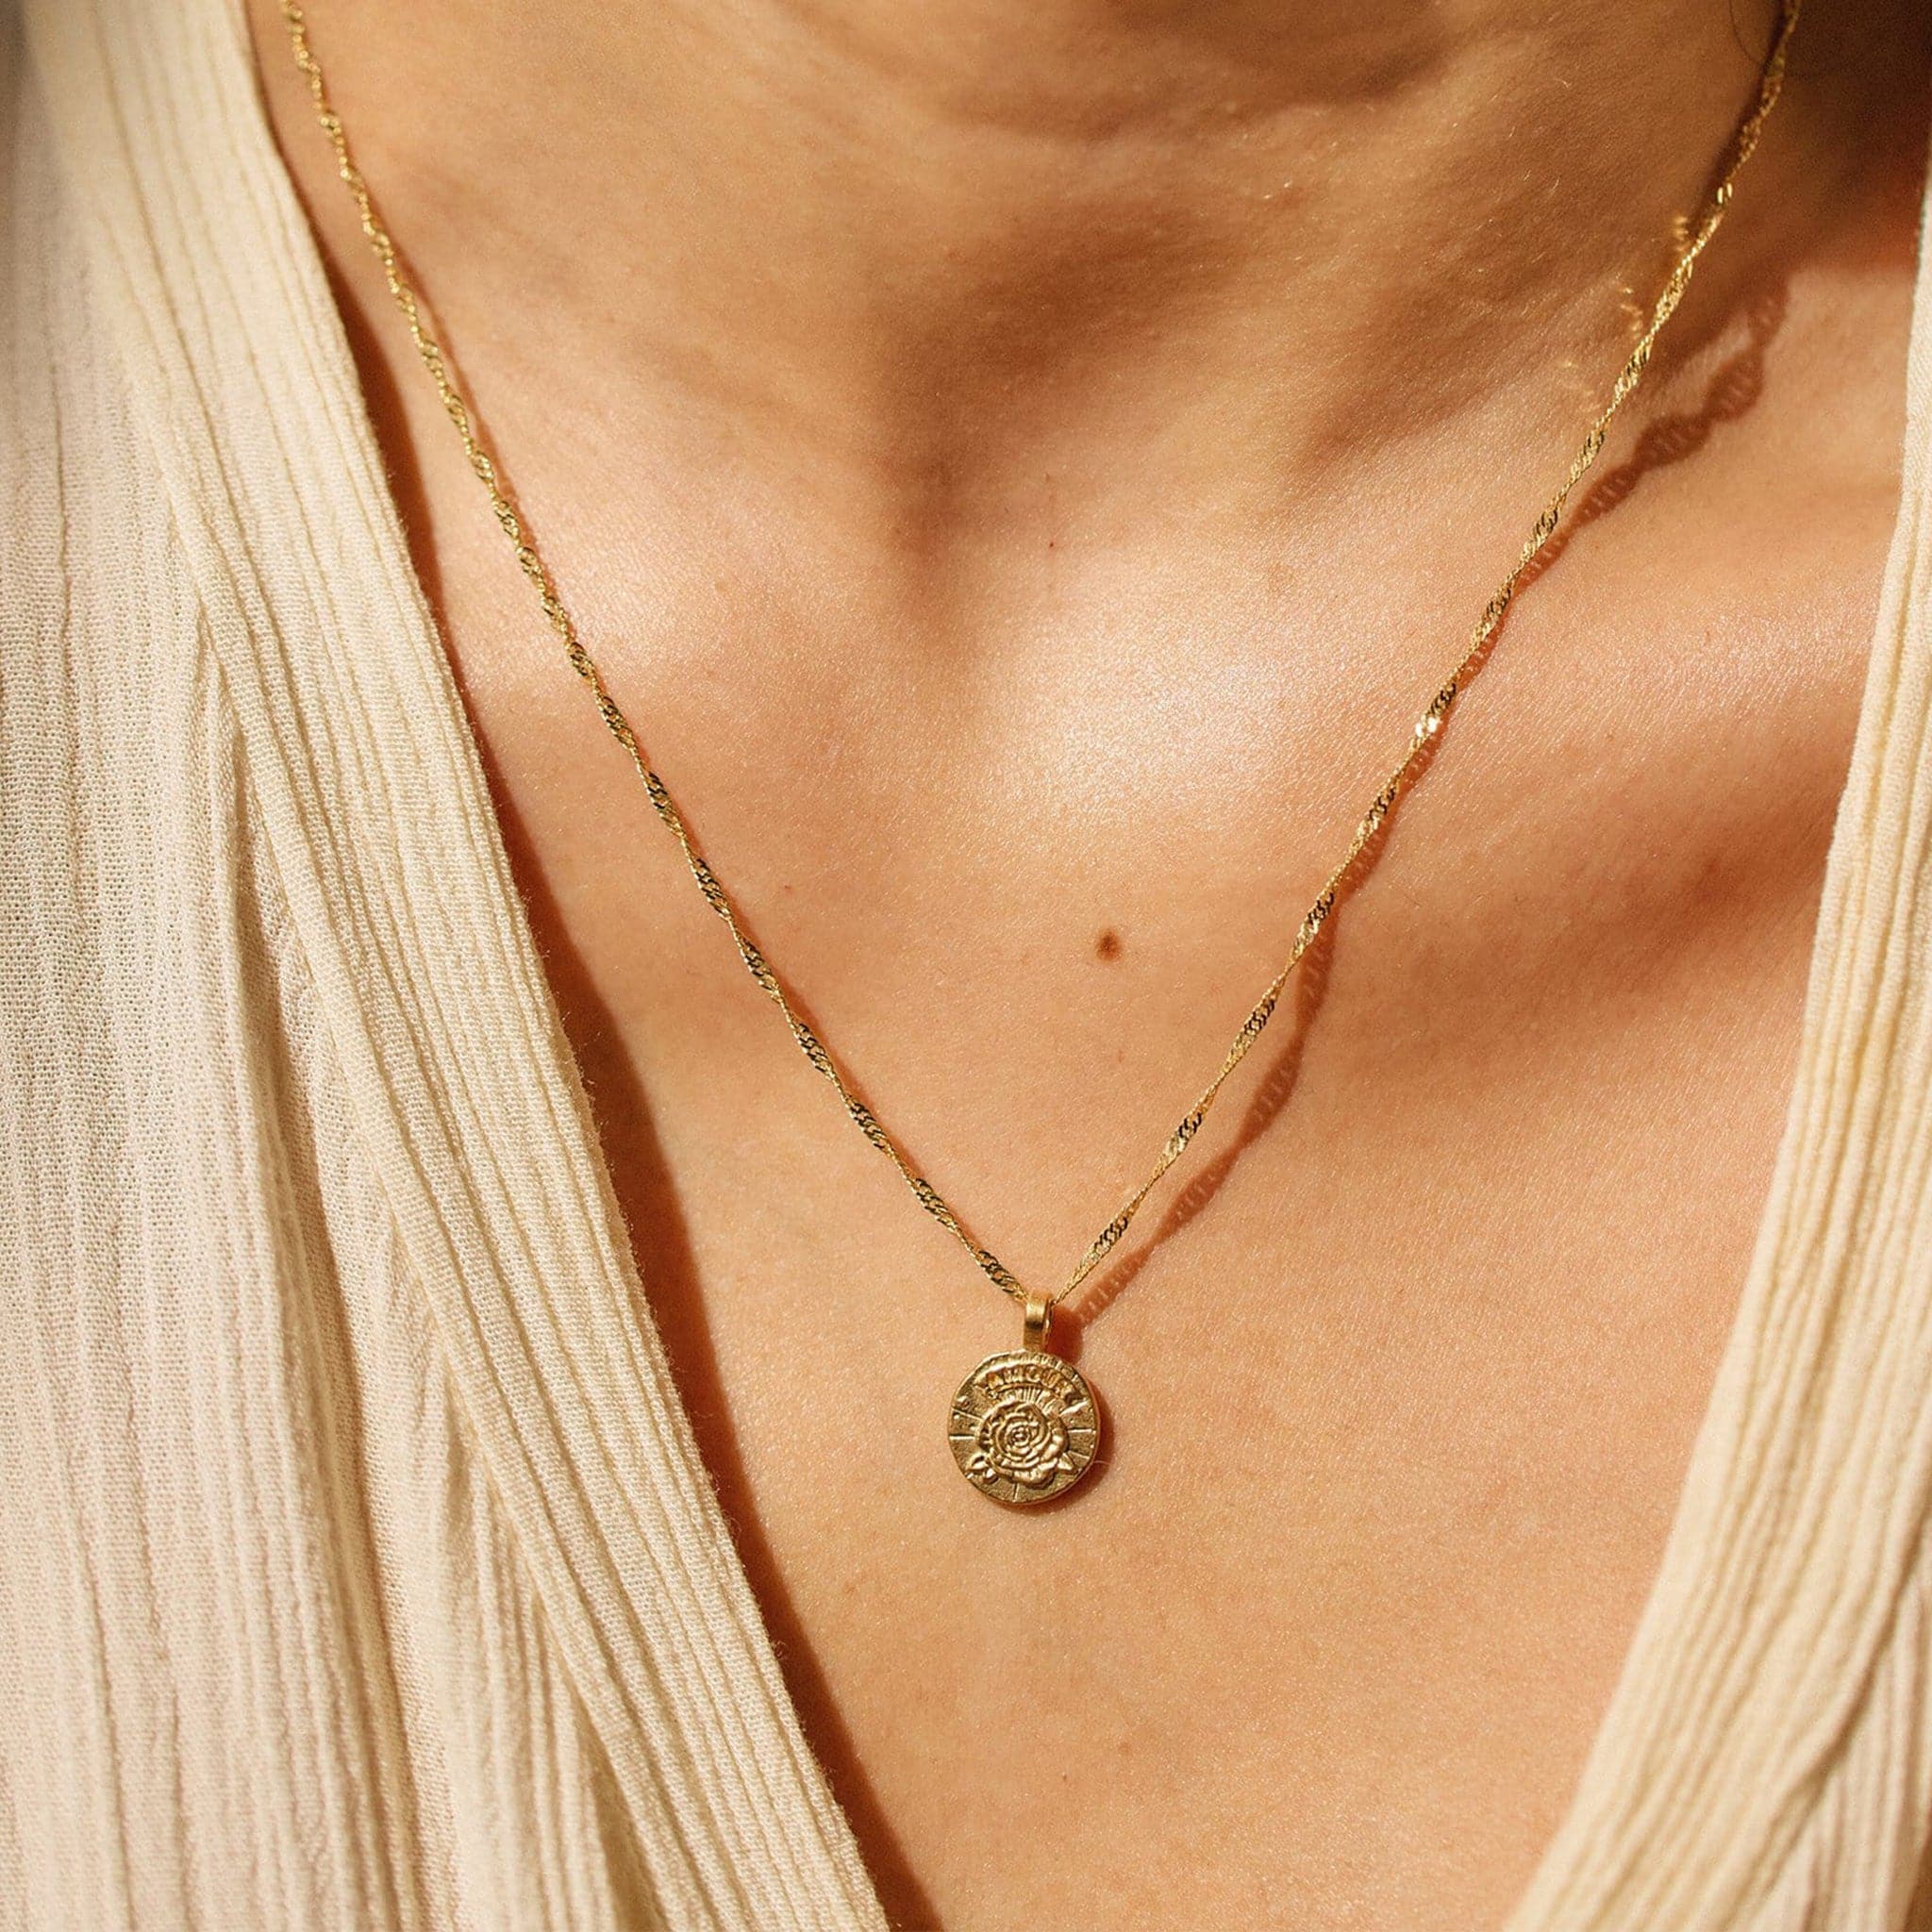 This picture is a close up of a woman’s neck. She is wearing a tan blouse. Around her neck is a gold chain with a gold circle pendent on the end. In the middle of the pendent is a gold rose. 